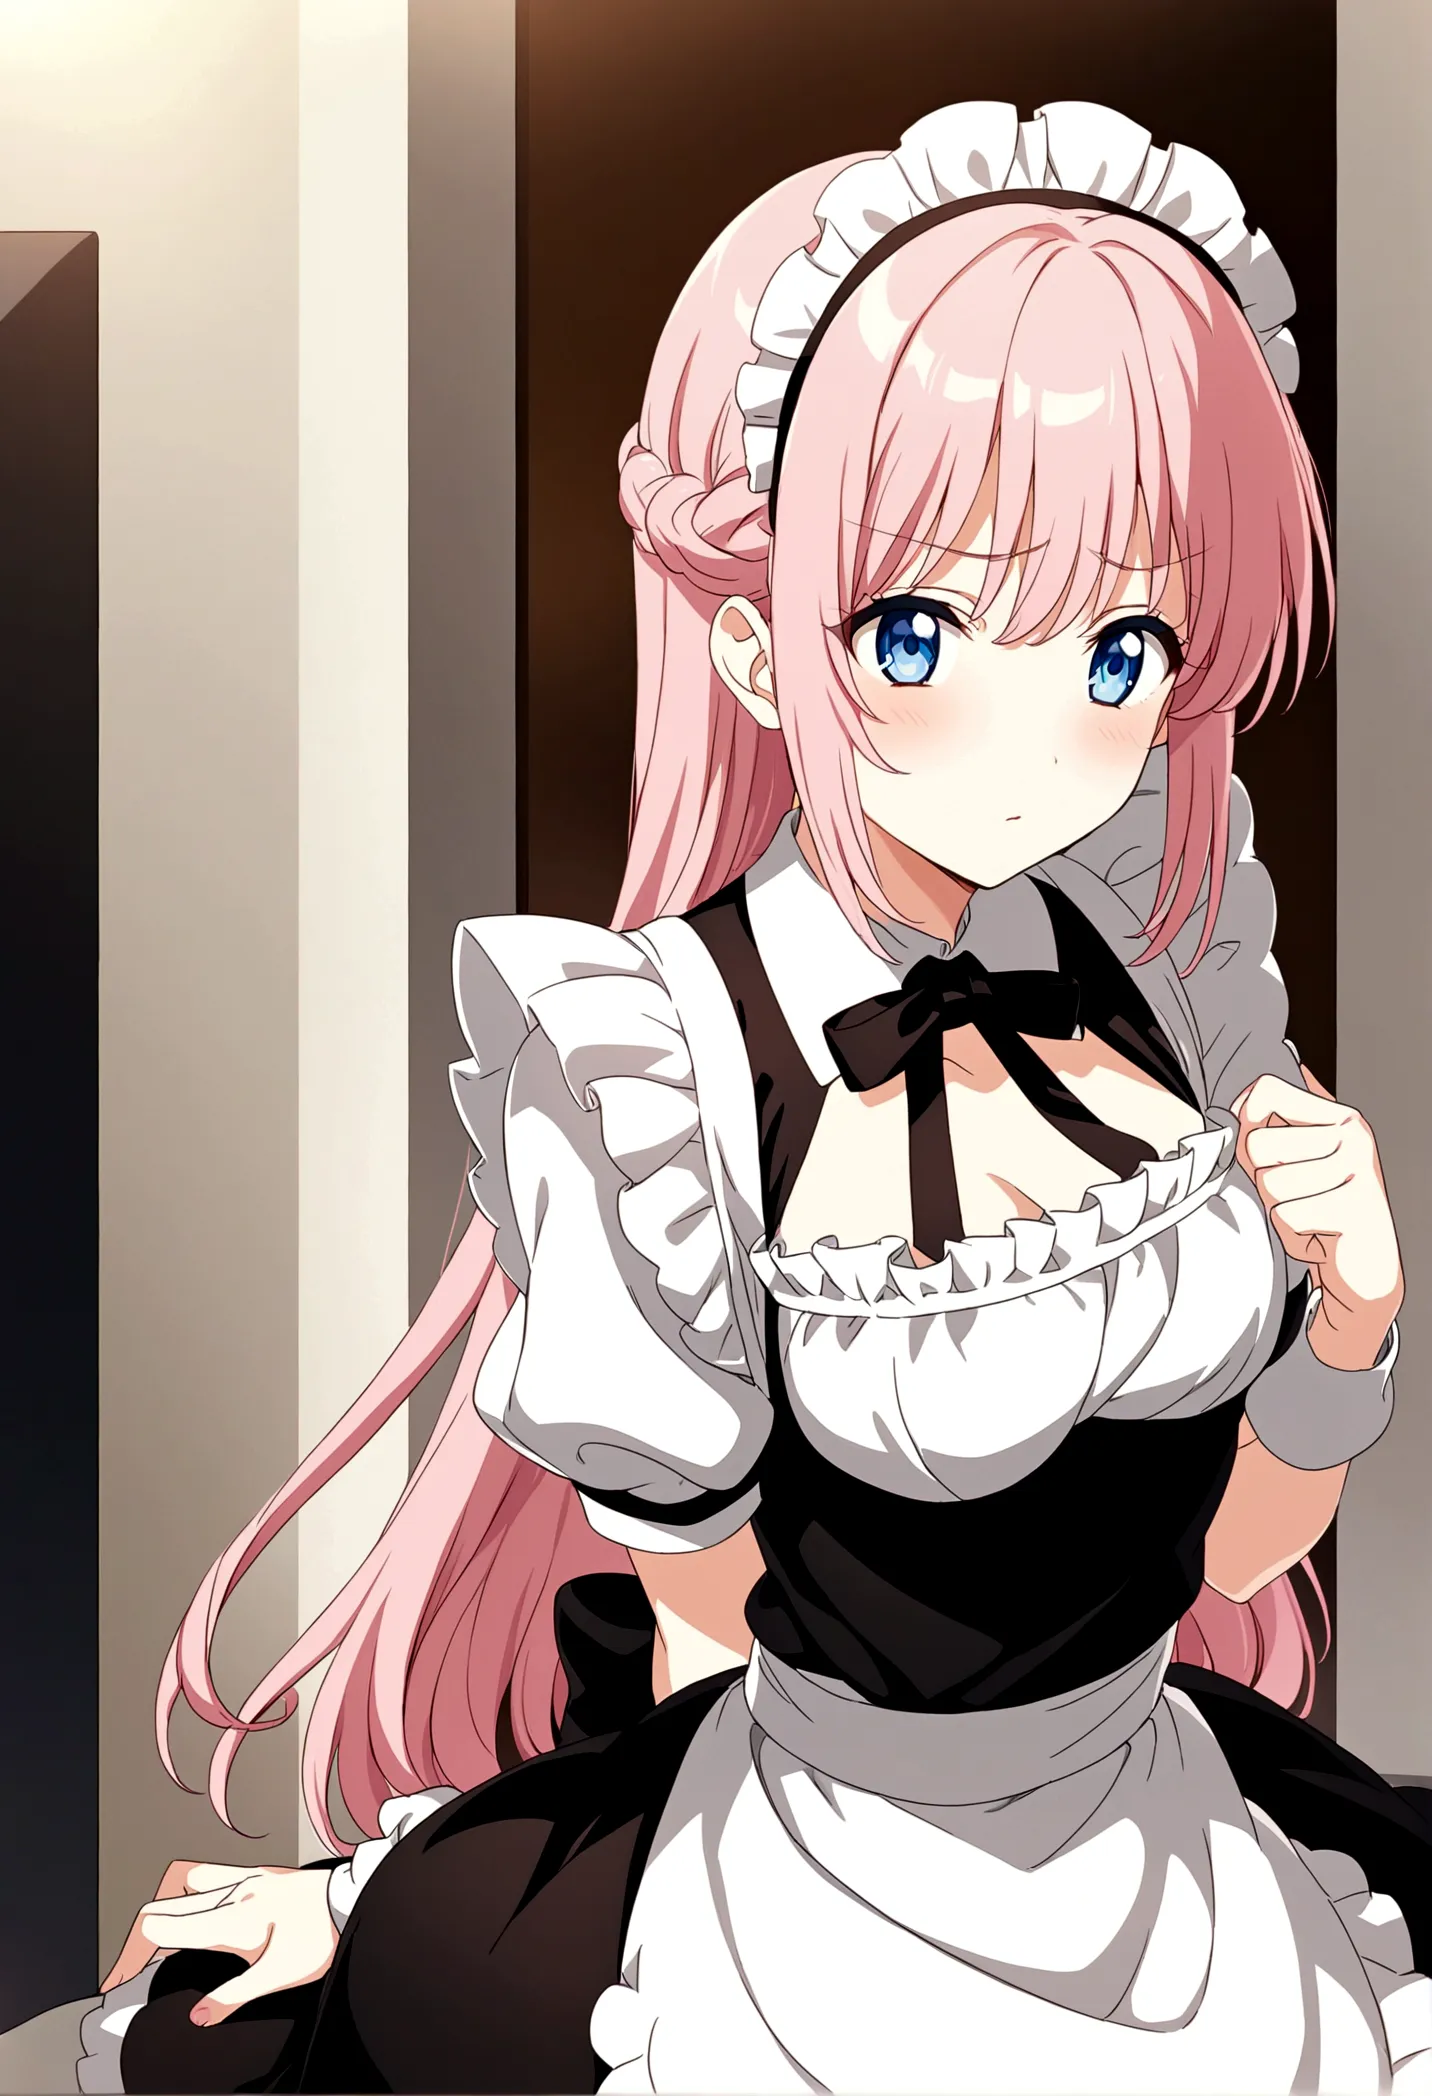 Anime girl with pink hair and white apron sitting in front of mirror, Comedian Reactions、anime girl in a Maid costume, Cute girl...